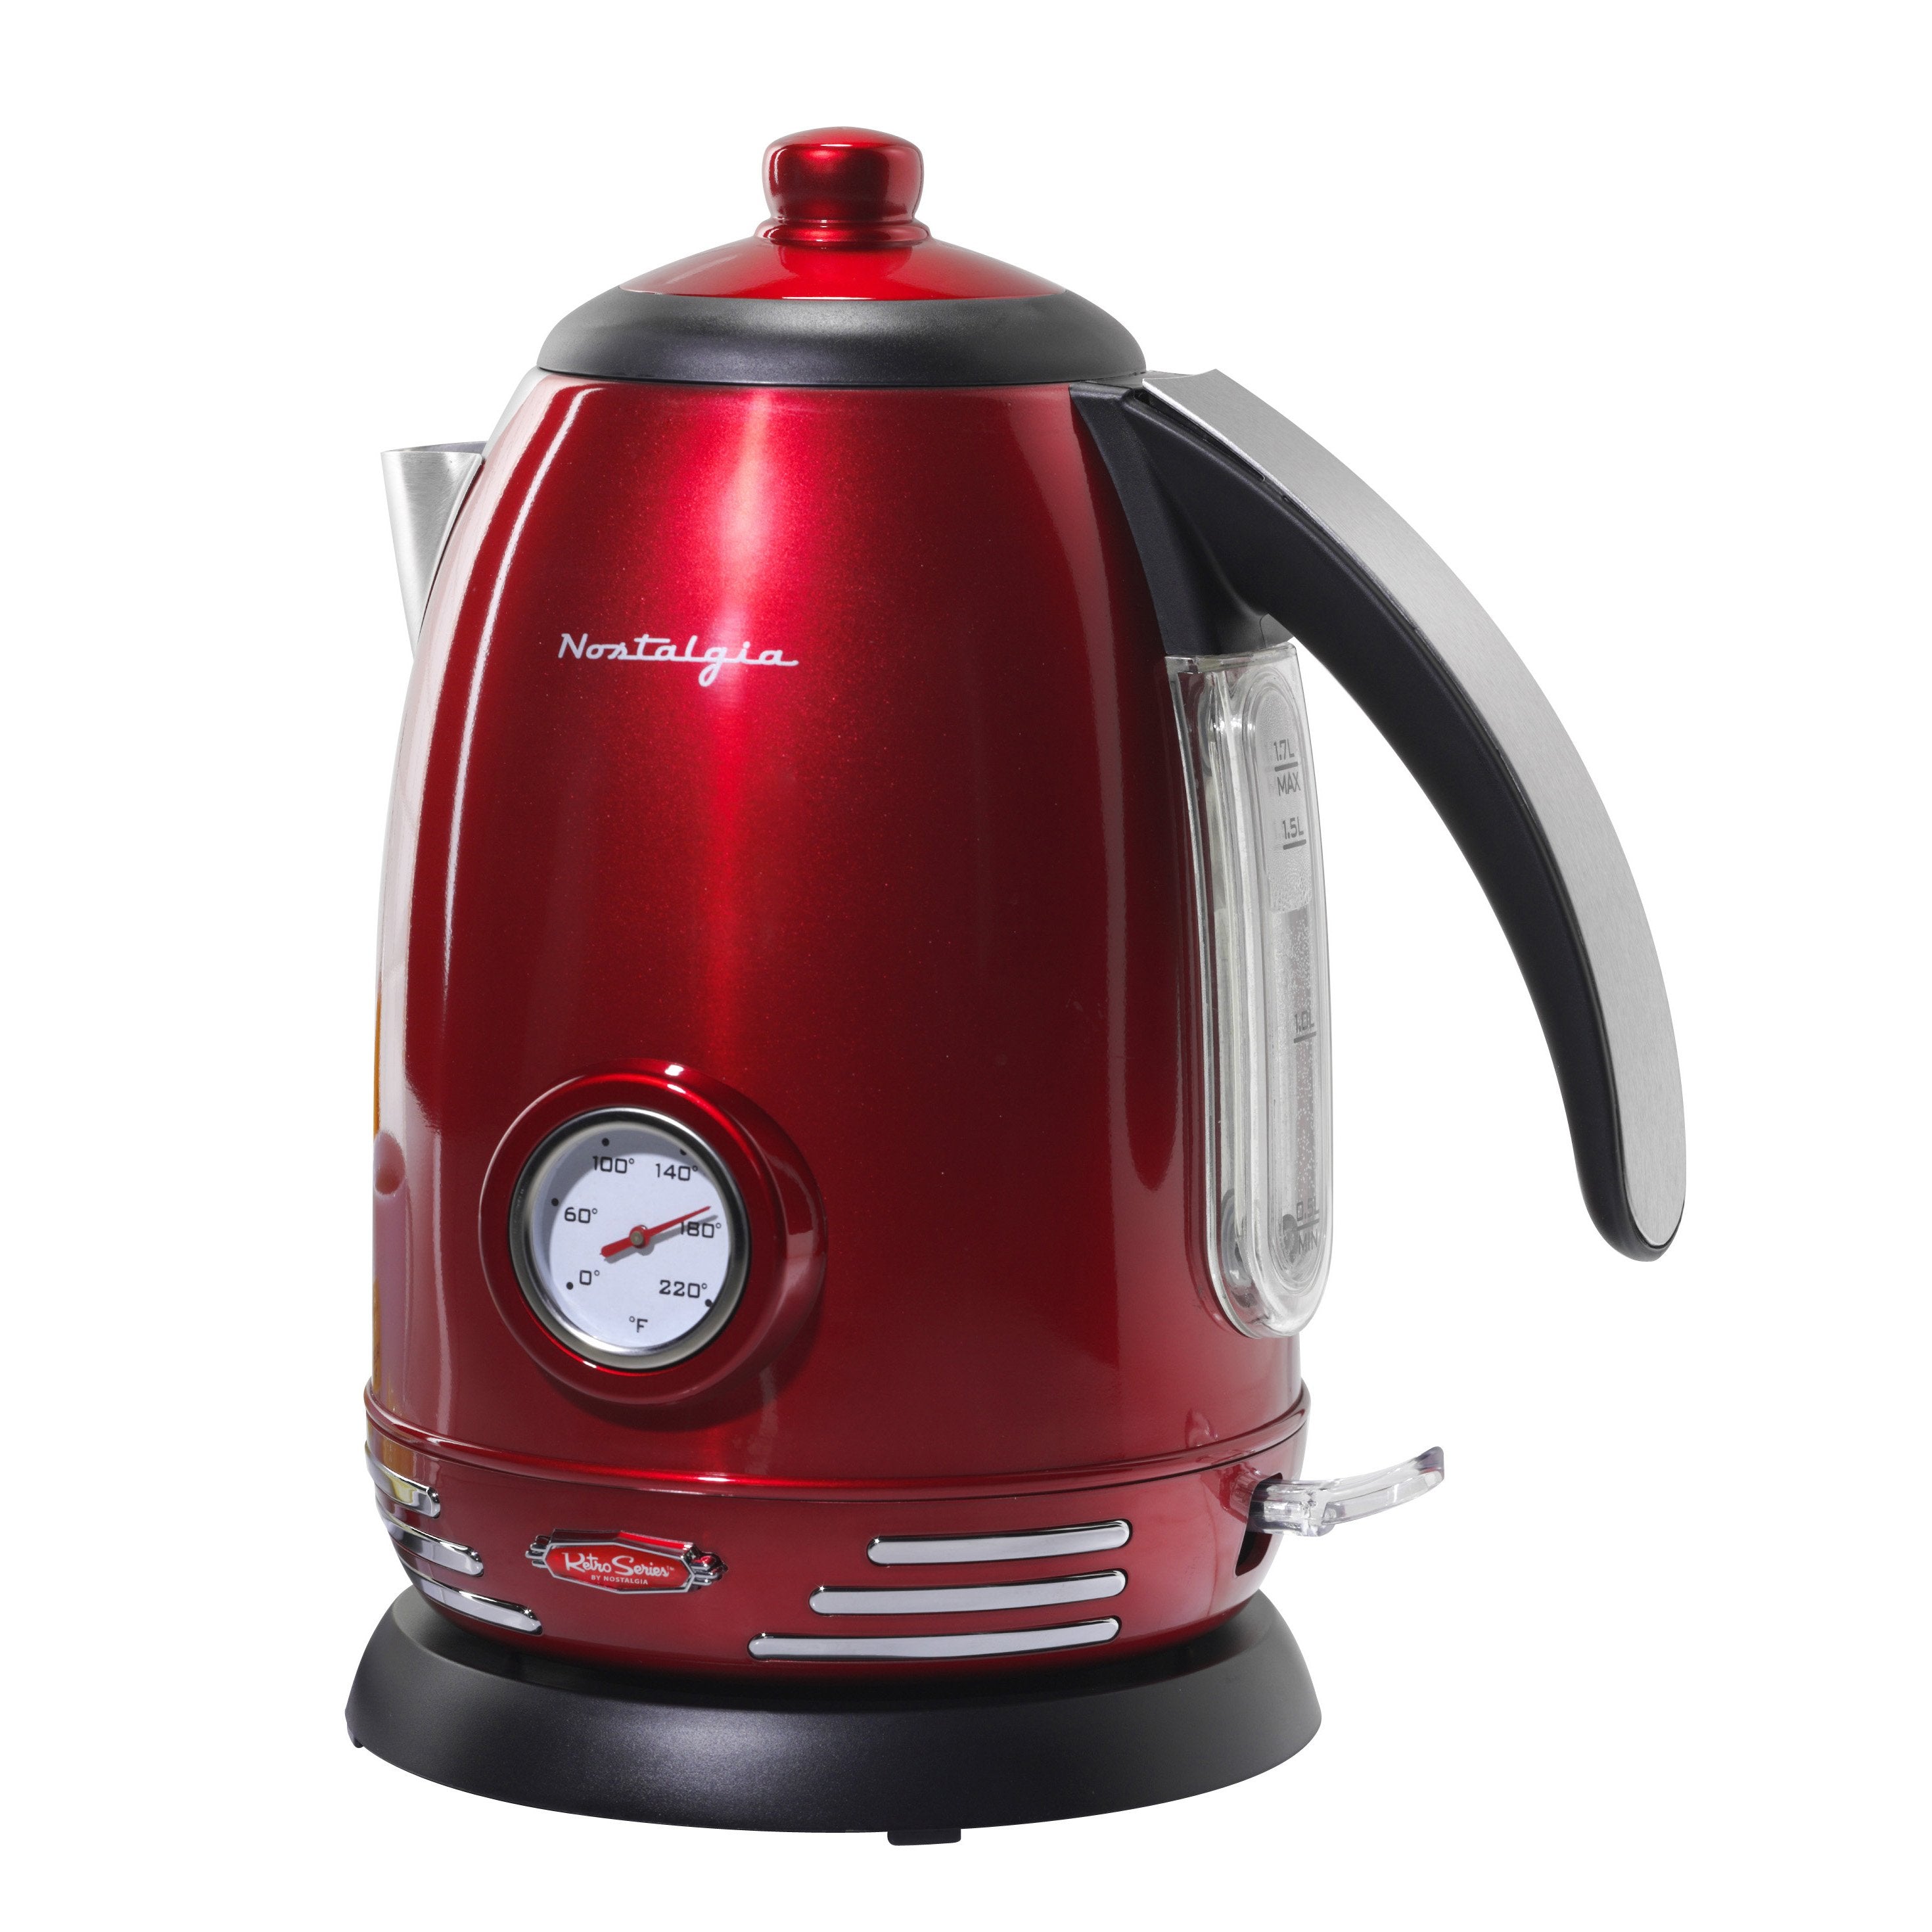 Retro 1.7-Liter Stainless Steel Electric Water Kettle with Strix Thermostat, Retro Red